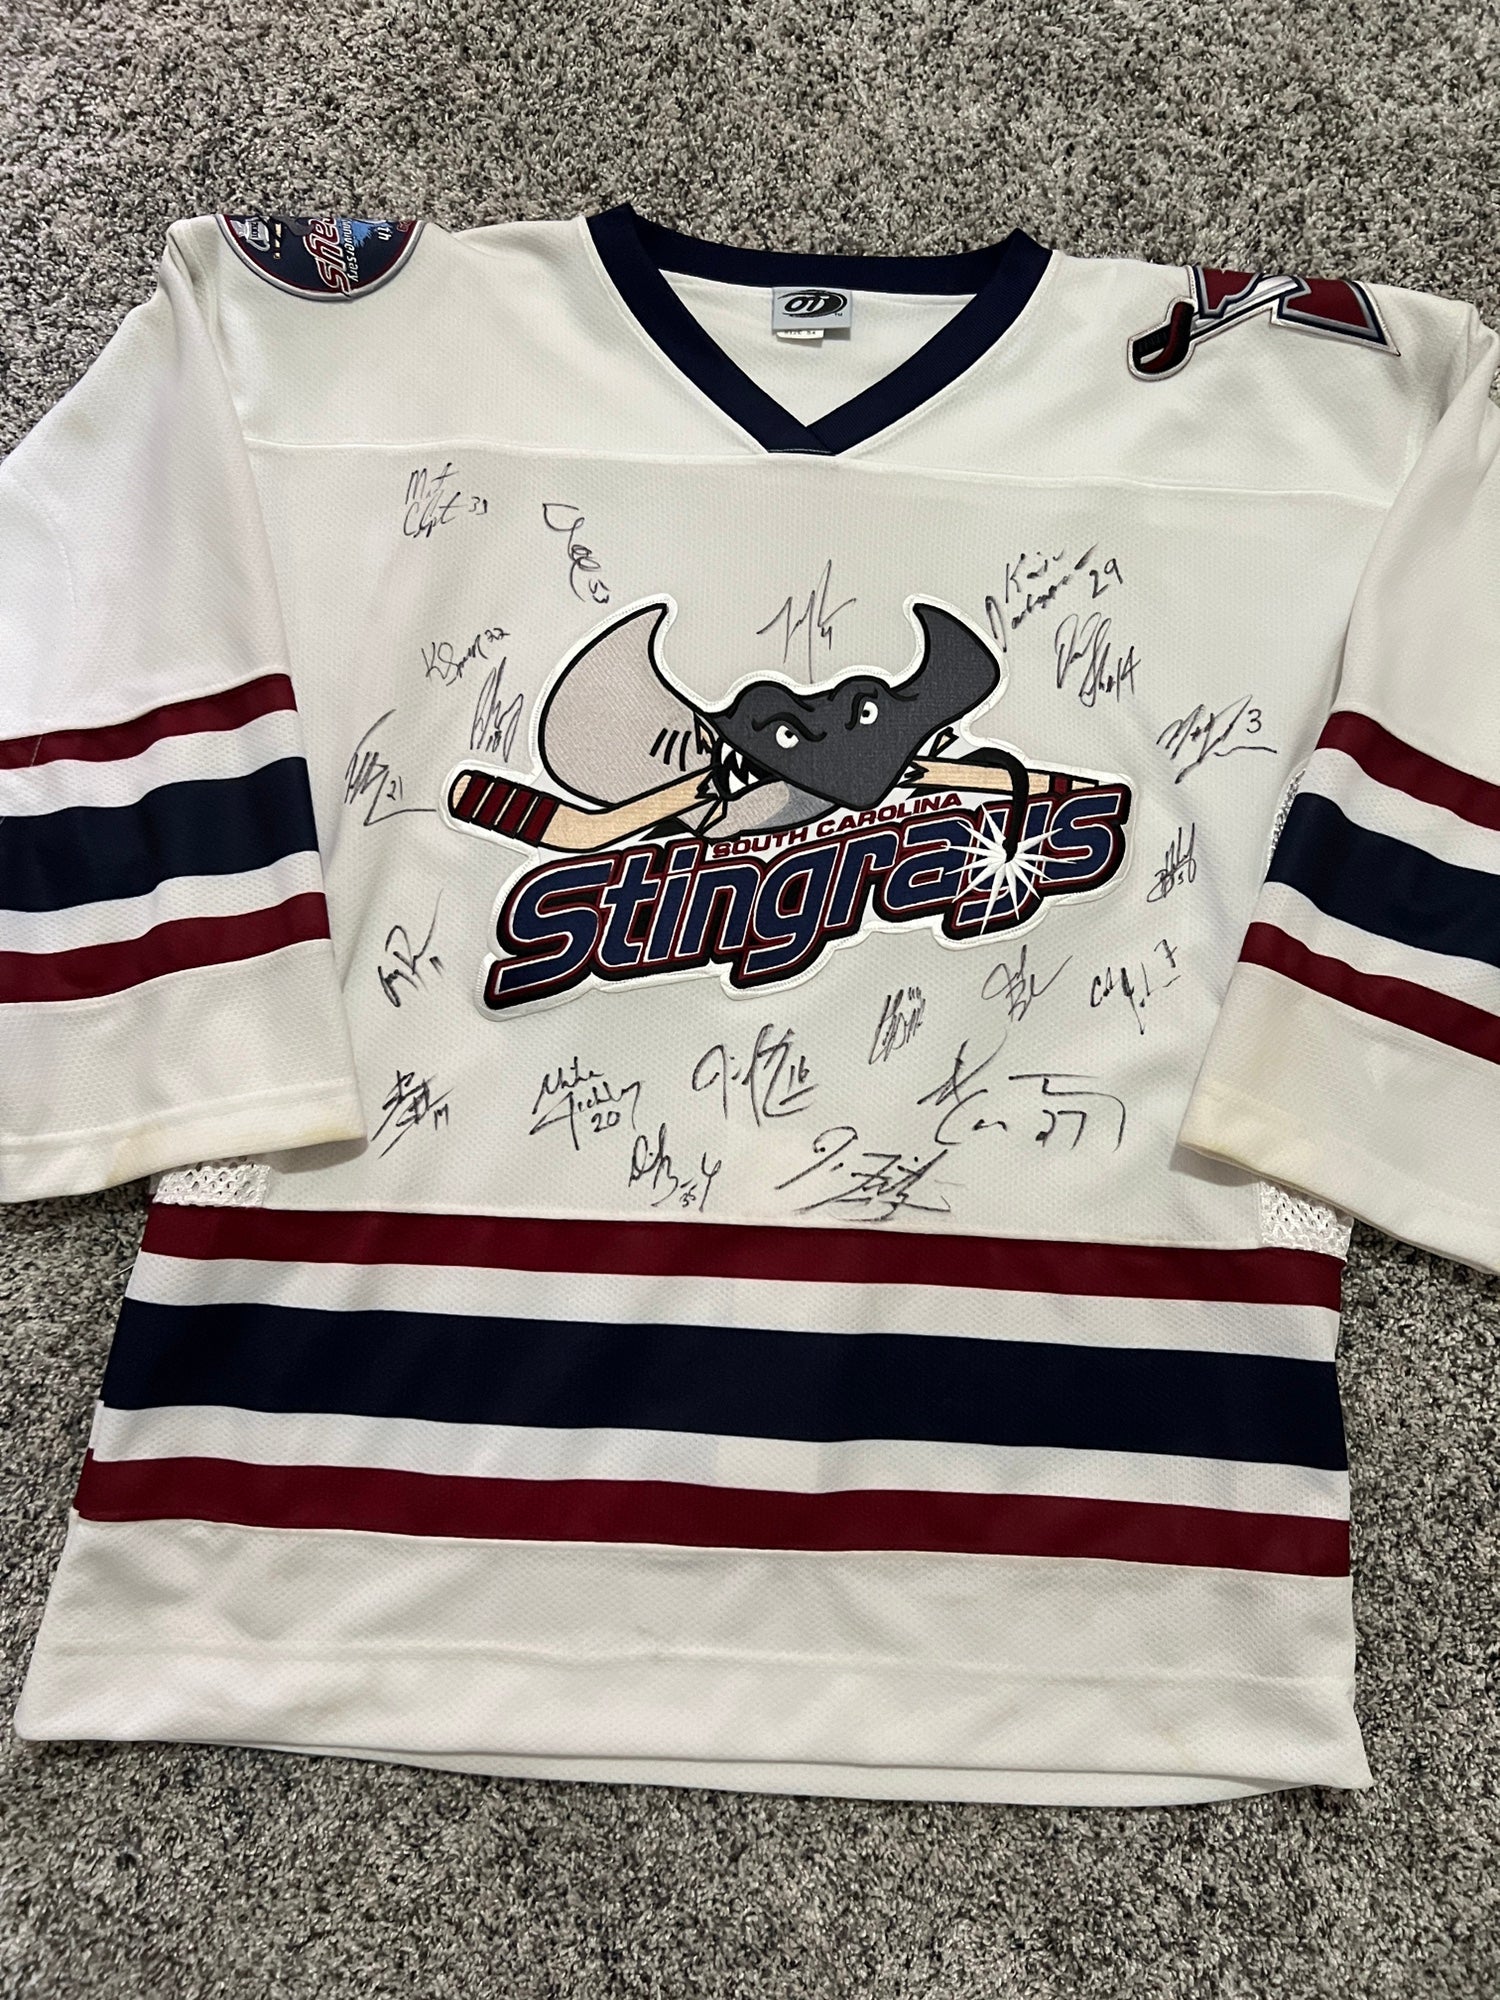 ECHL Black Panther MARVEL Greenville Swamp Rabbits Game Worn Autographed  Jersey and Socks